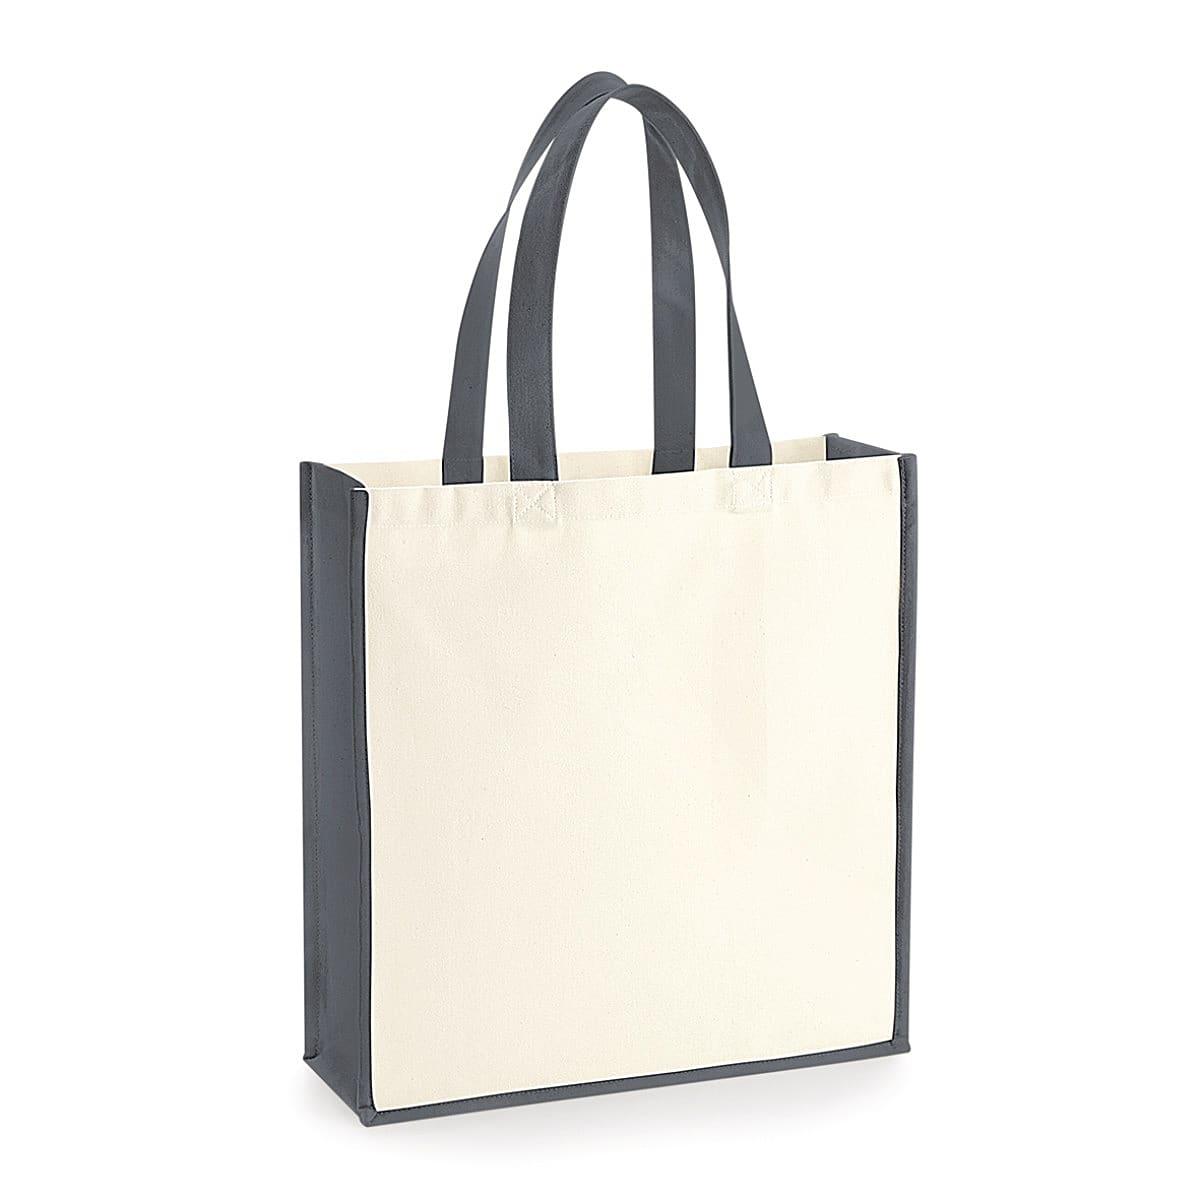 Westford Mill Gallery Canvas Tote in Natural / Graphite (Product Code: W600)